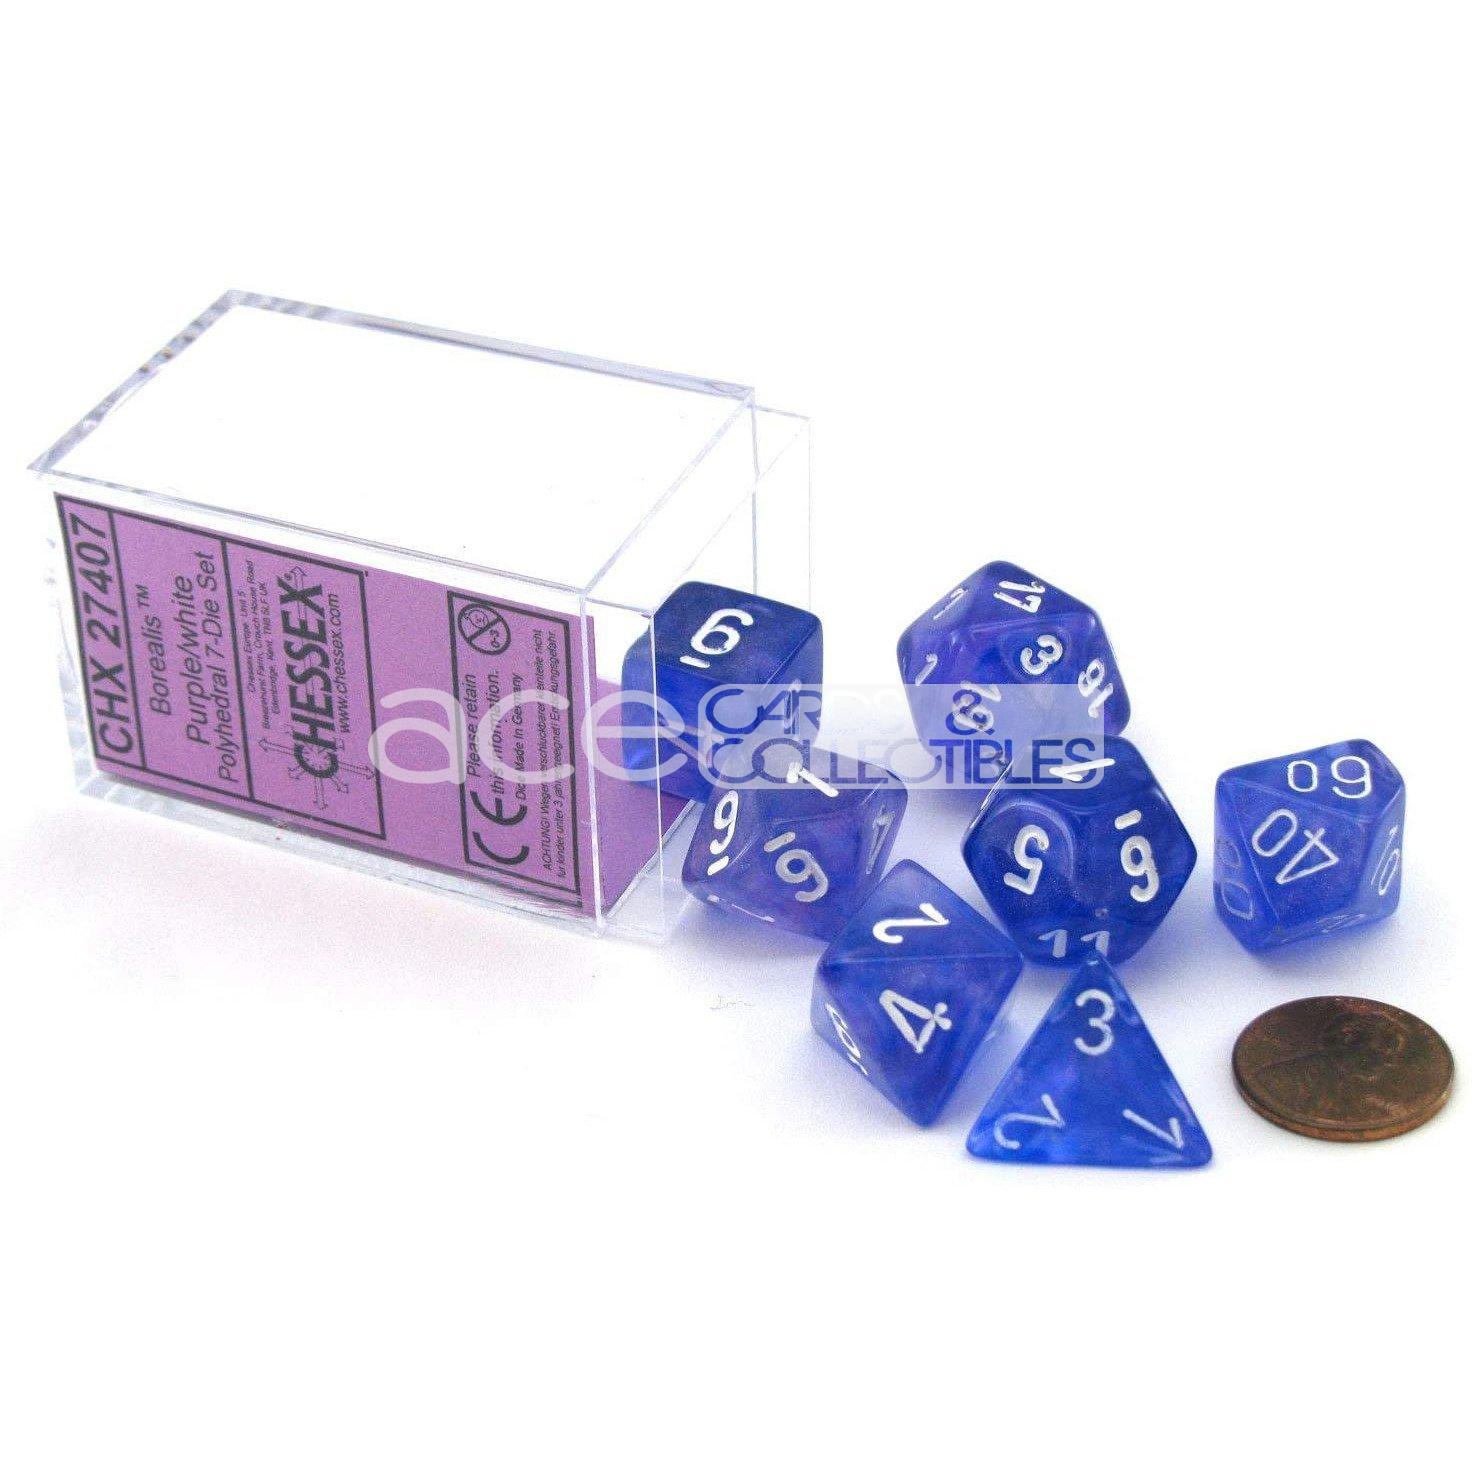 Chessex Borealis™ Polyhedral 7pcs Dice (Purple/White) [CHX27407]-Chessex-Ace Cards & Collectibles